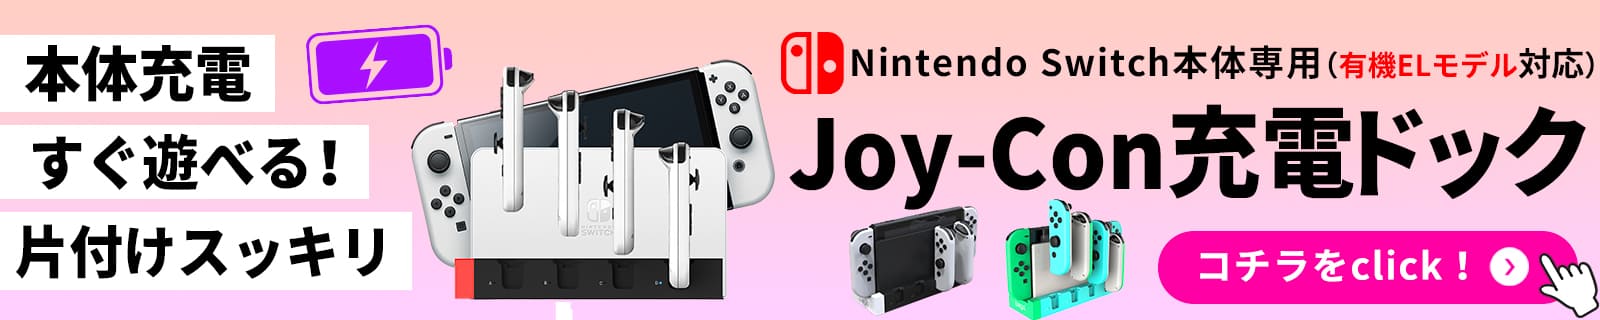 NintendoSwitchコントローラー用4台充電機